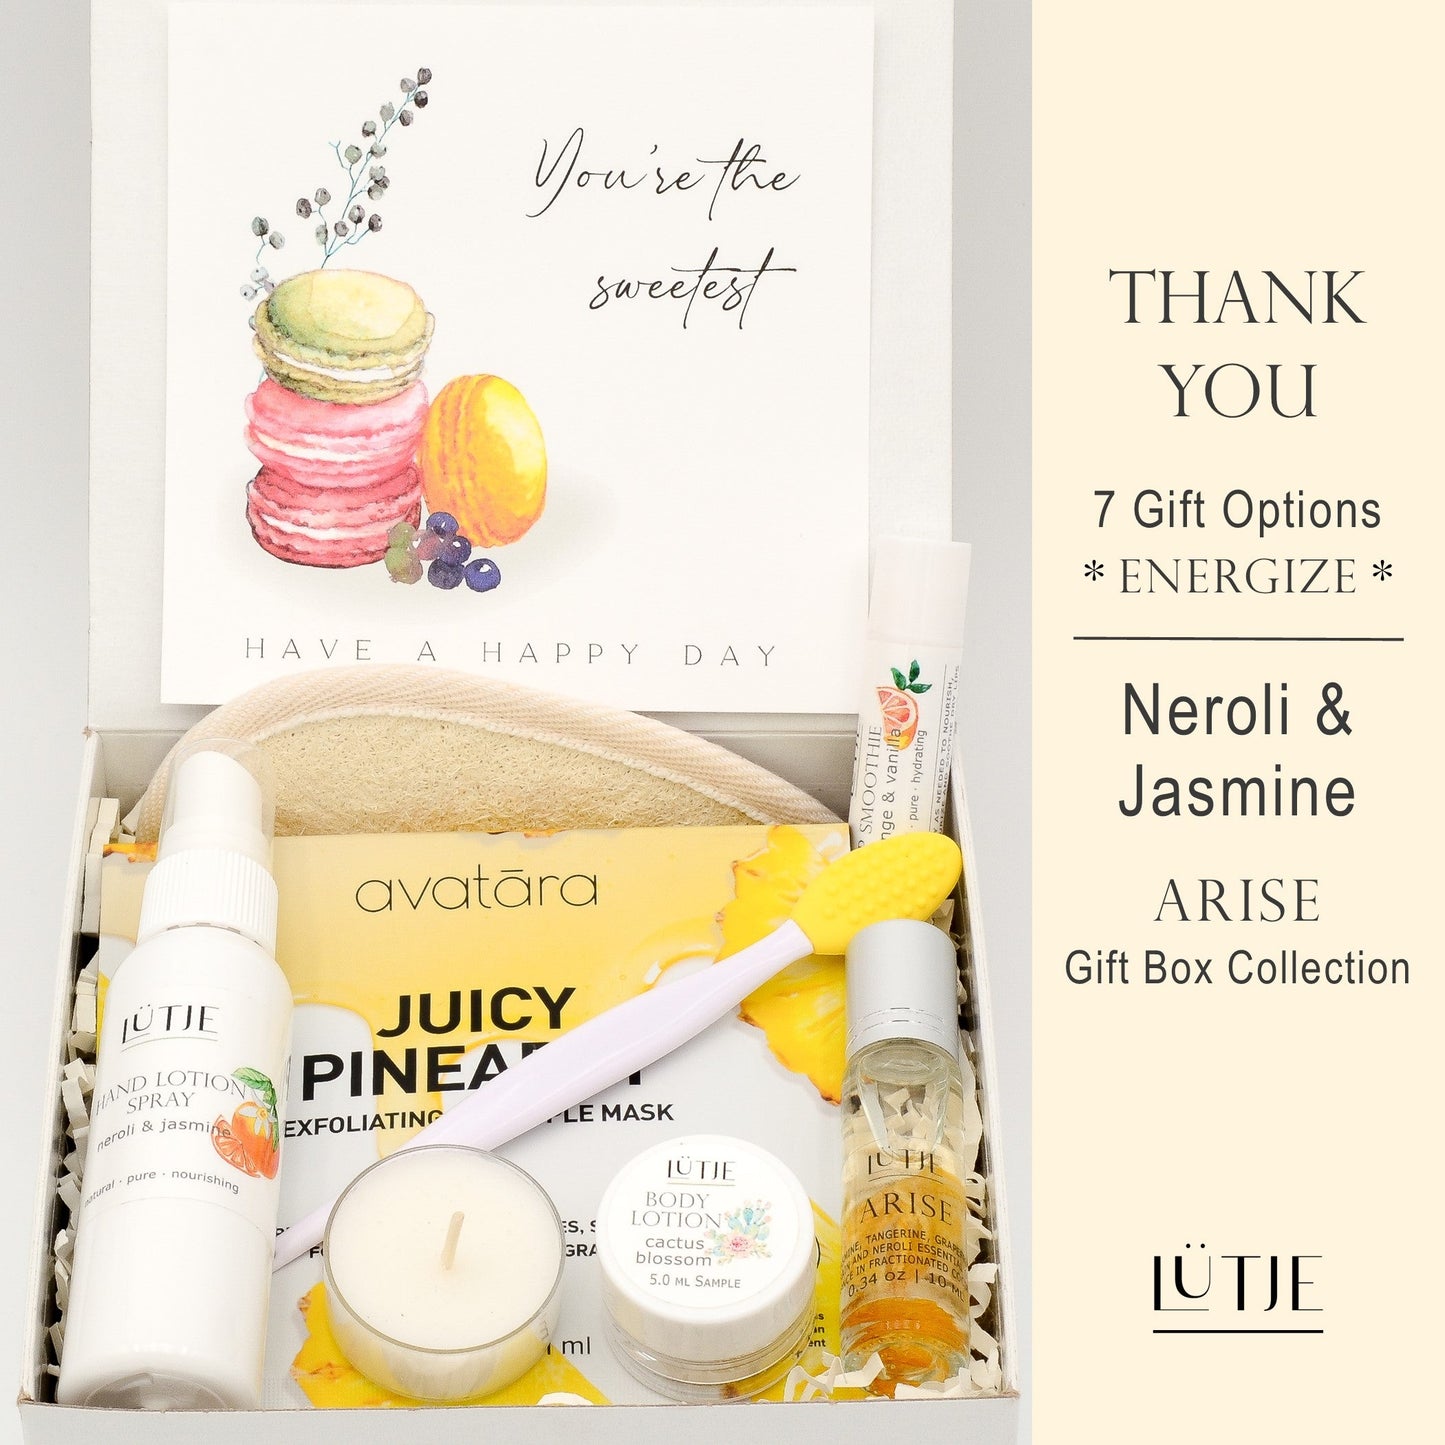 Gift Box for women, wife, daughter, BFF, sister, mom, or grandma, includes Neroli & Jasmine hand lotion spray and body lotion, essential oil, lip balm, soothing muscle balm, Bergamot & Pear room & linen spray, French soap, French bath salts, hydrating face mask, other bath, spa and self-care items, and 18K gold-plated necklace with engraved heart.